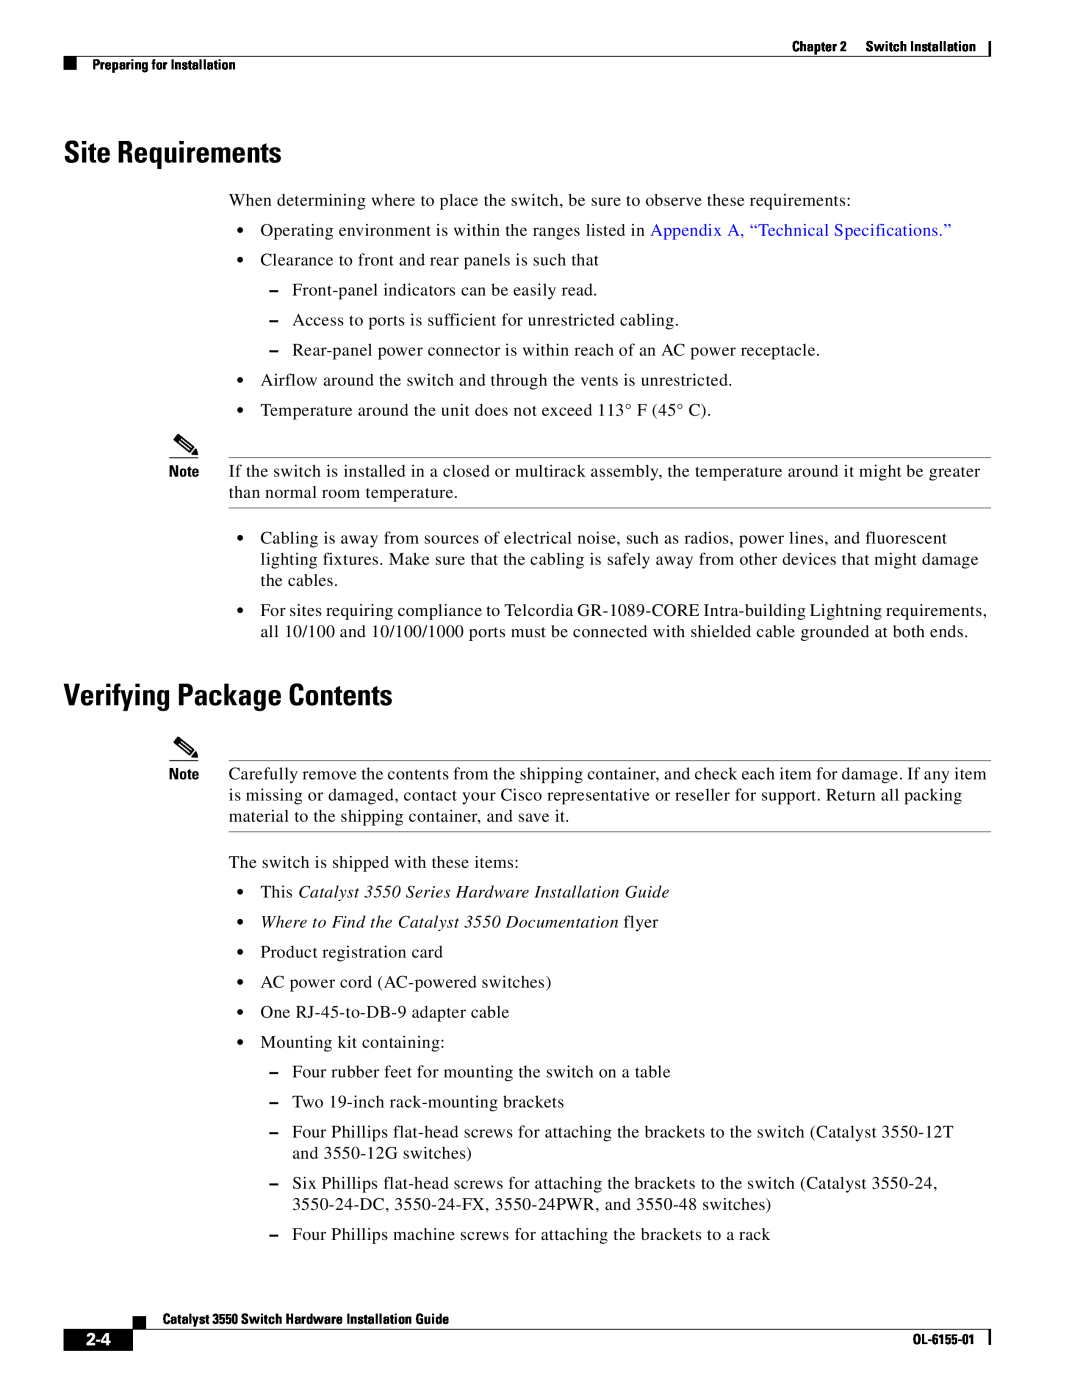 Cisco Systems 3550 manual Site Requirements, Verifying Package Contents 